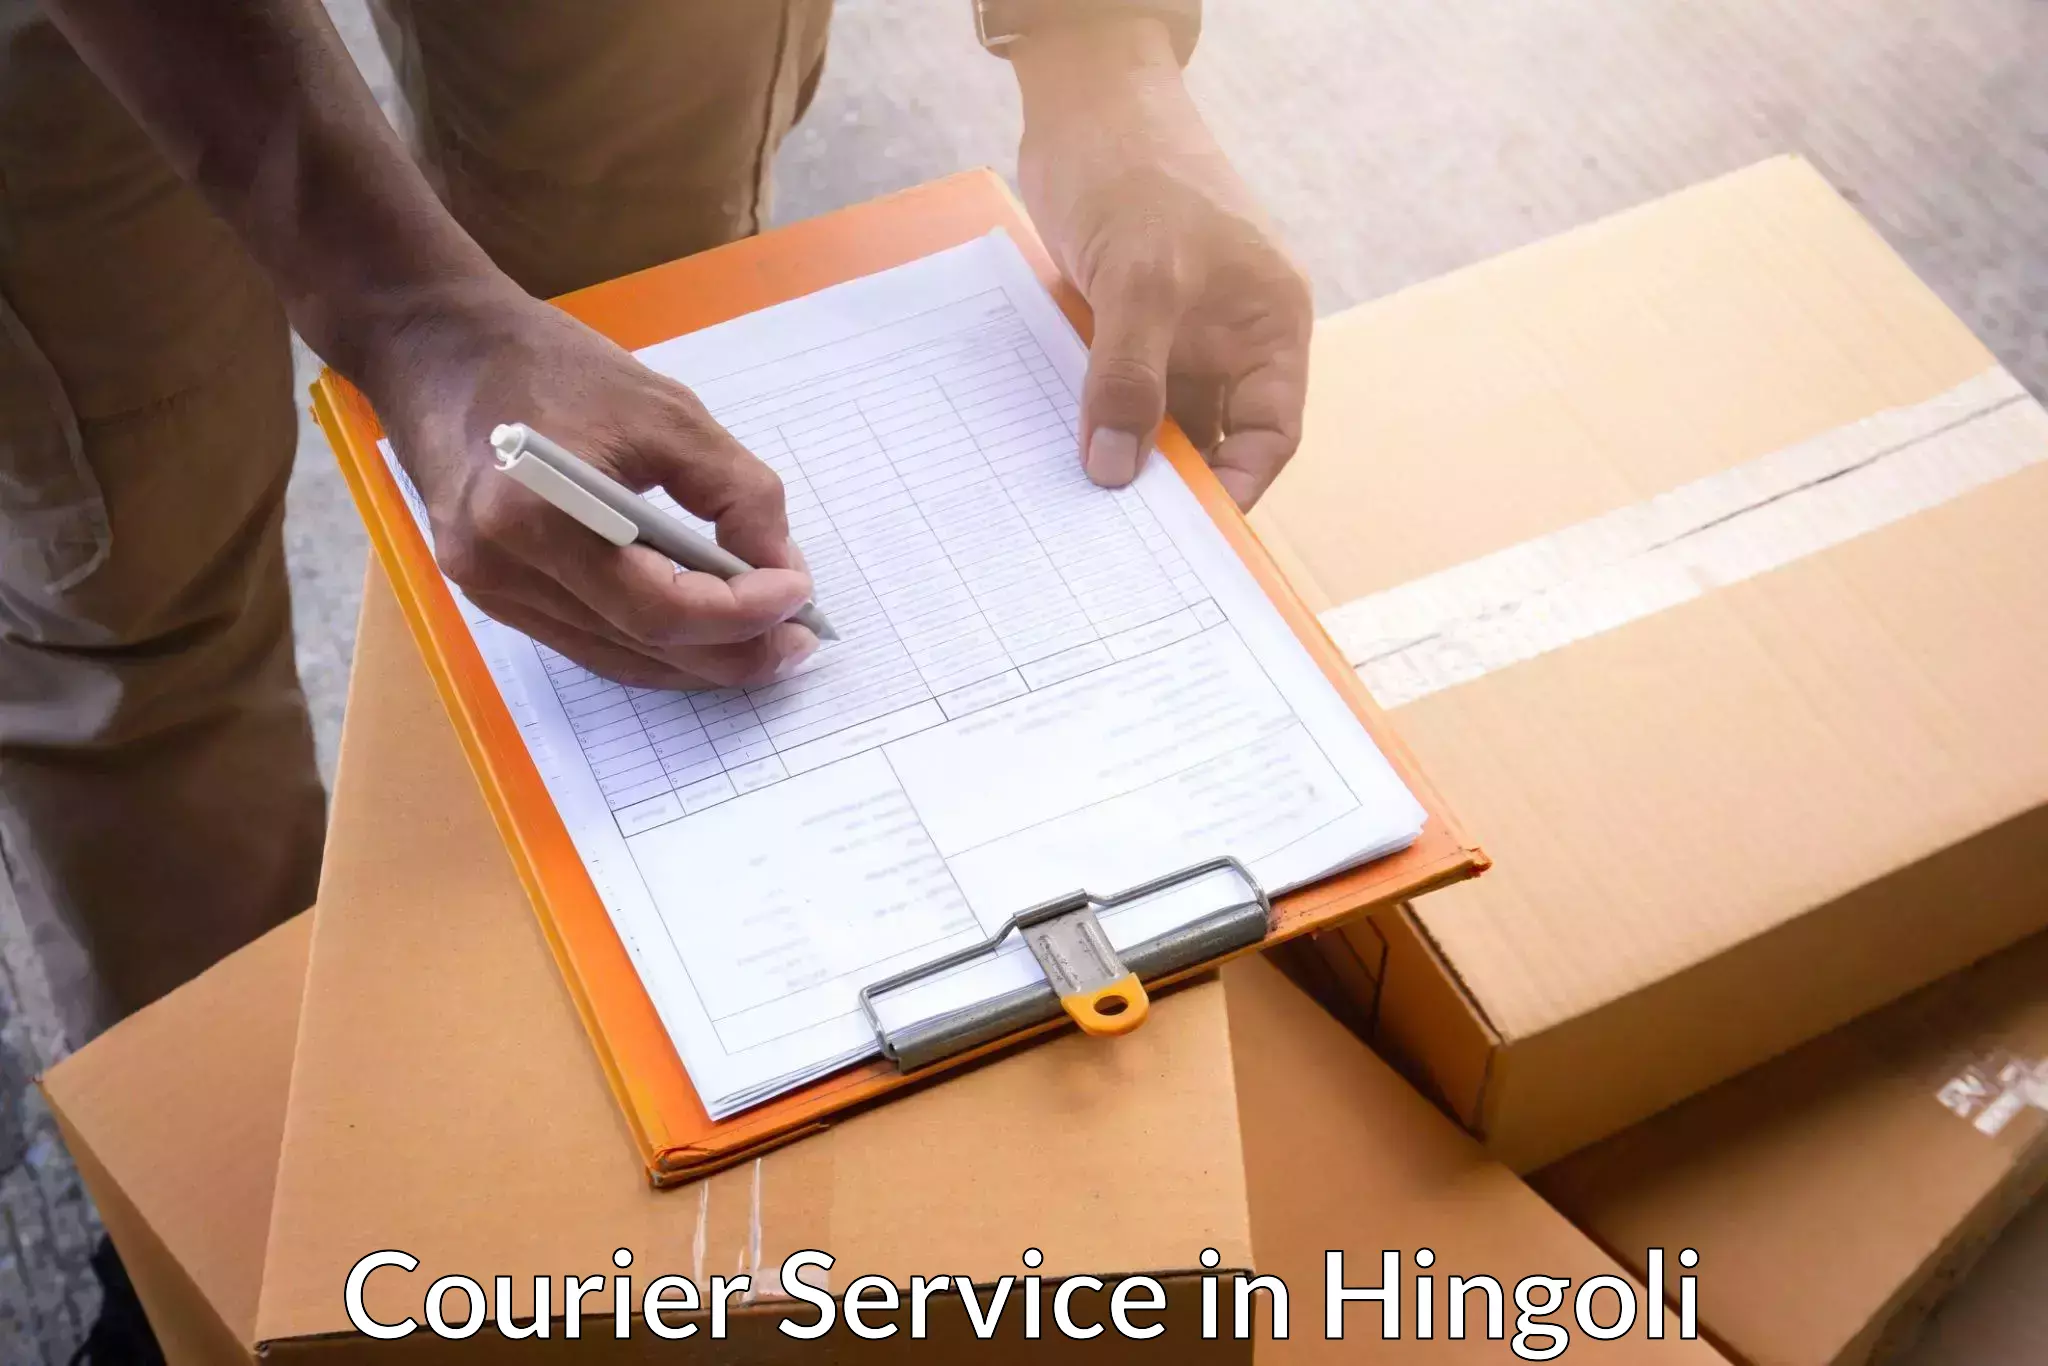 Affordable parcel service in Hingoli